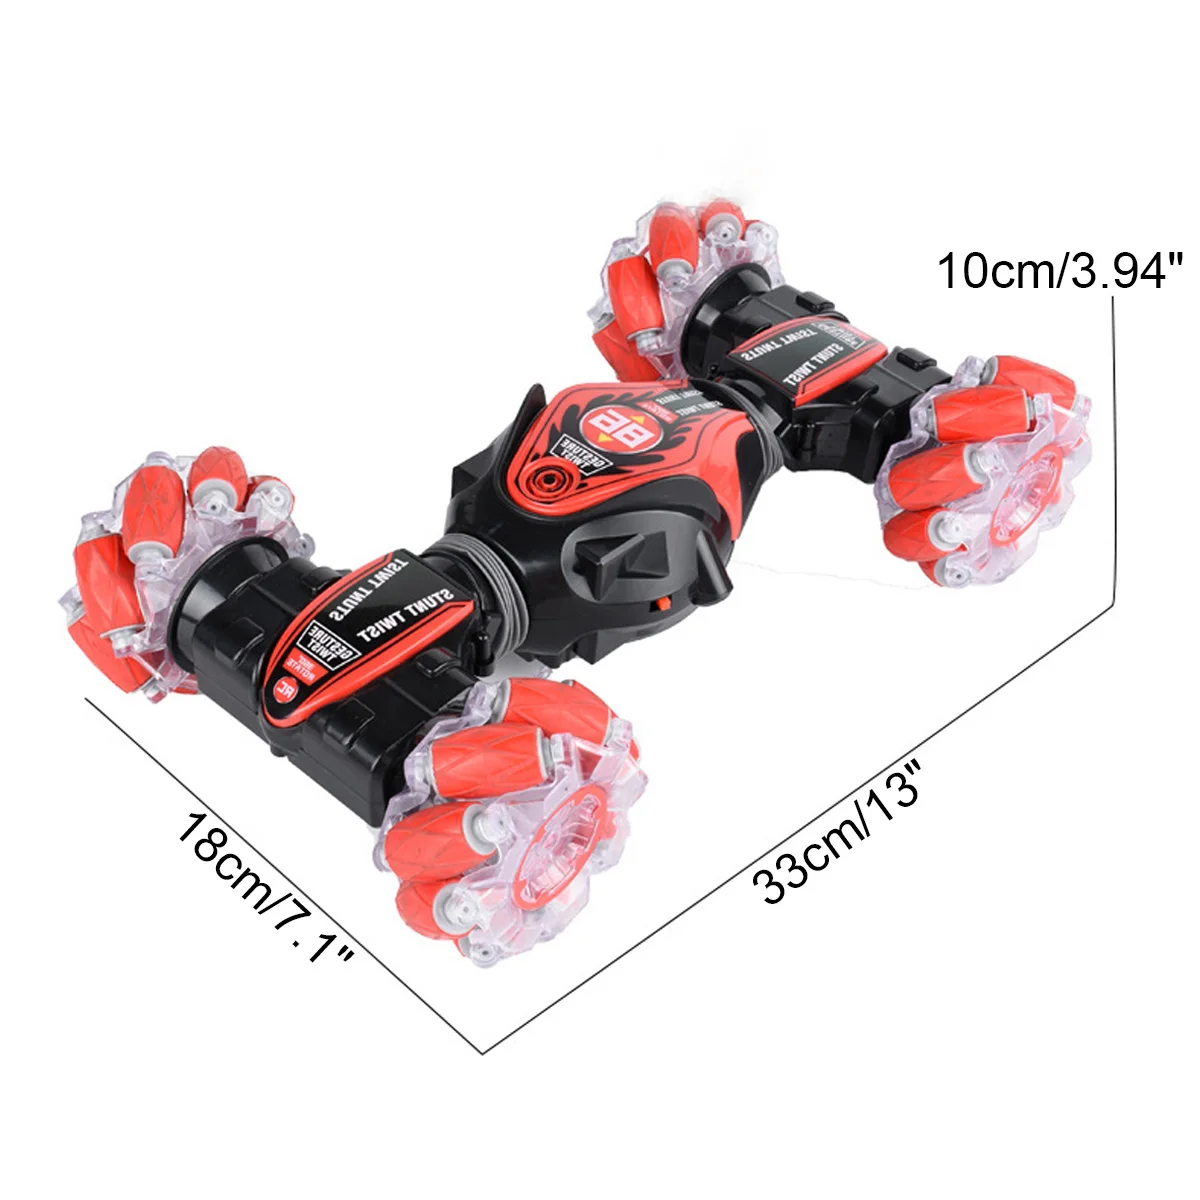 

4WD RC Stunt Car Watch Control Gesture Induction Deformable Electric RC Drift Car Transformer Car Toys for Kids with LED Light